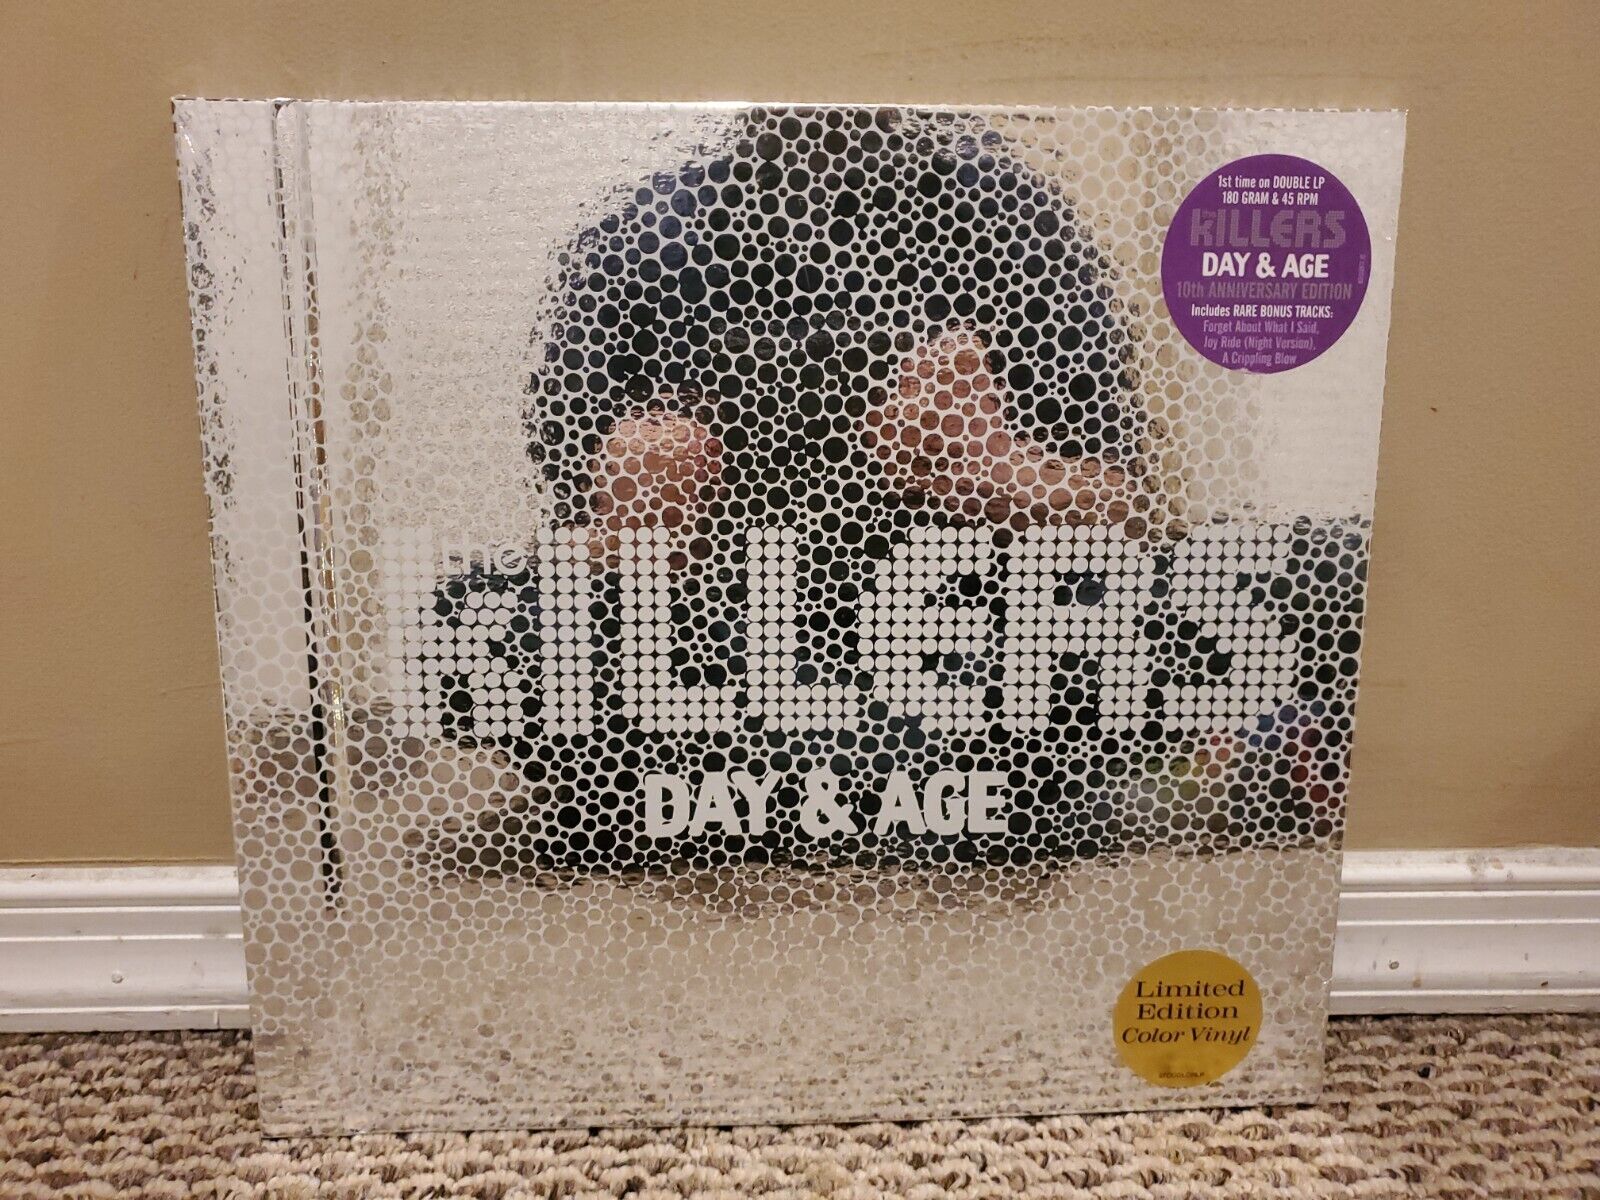 The Killers - Day and Age 10th Anniversary 2xLP 180g Silver/Gray Vinyl 45 RPM